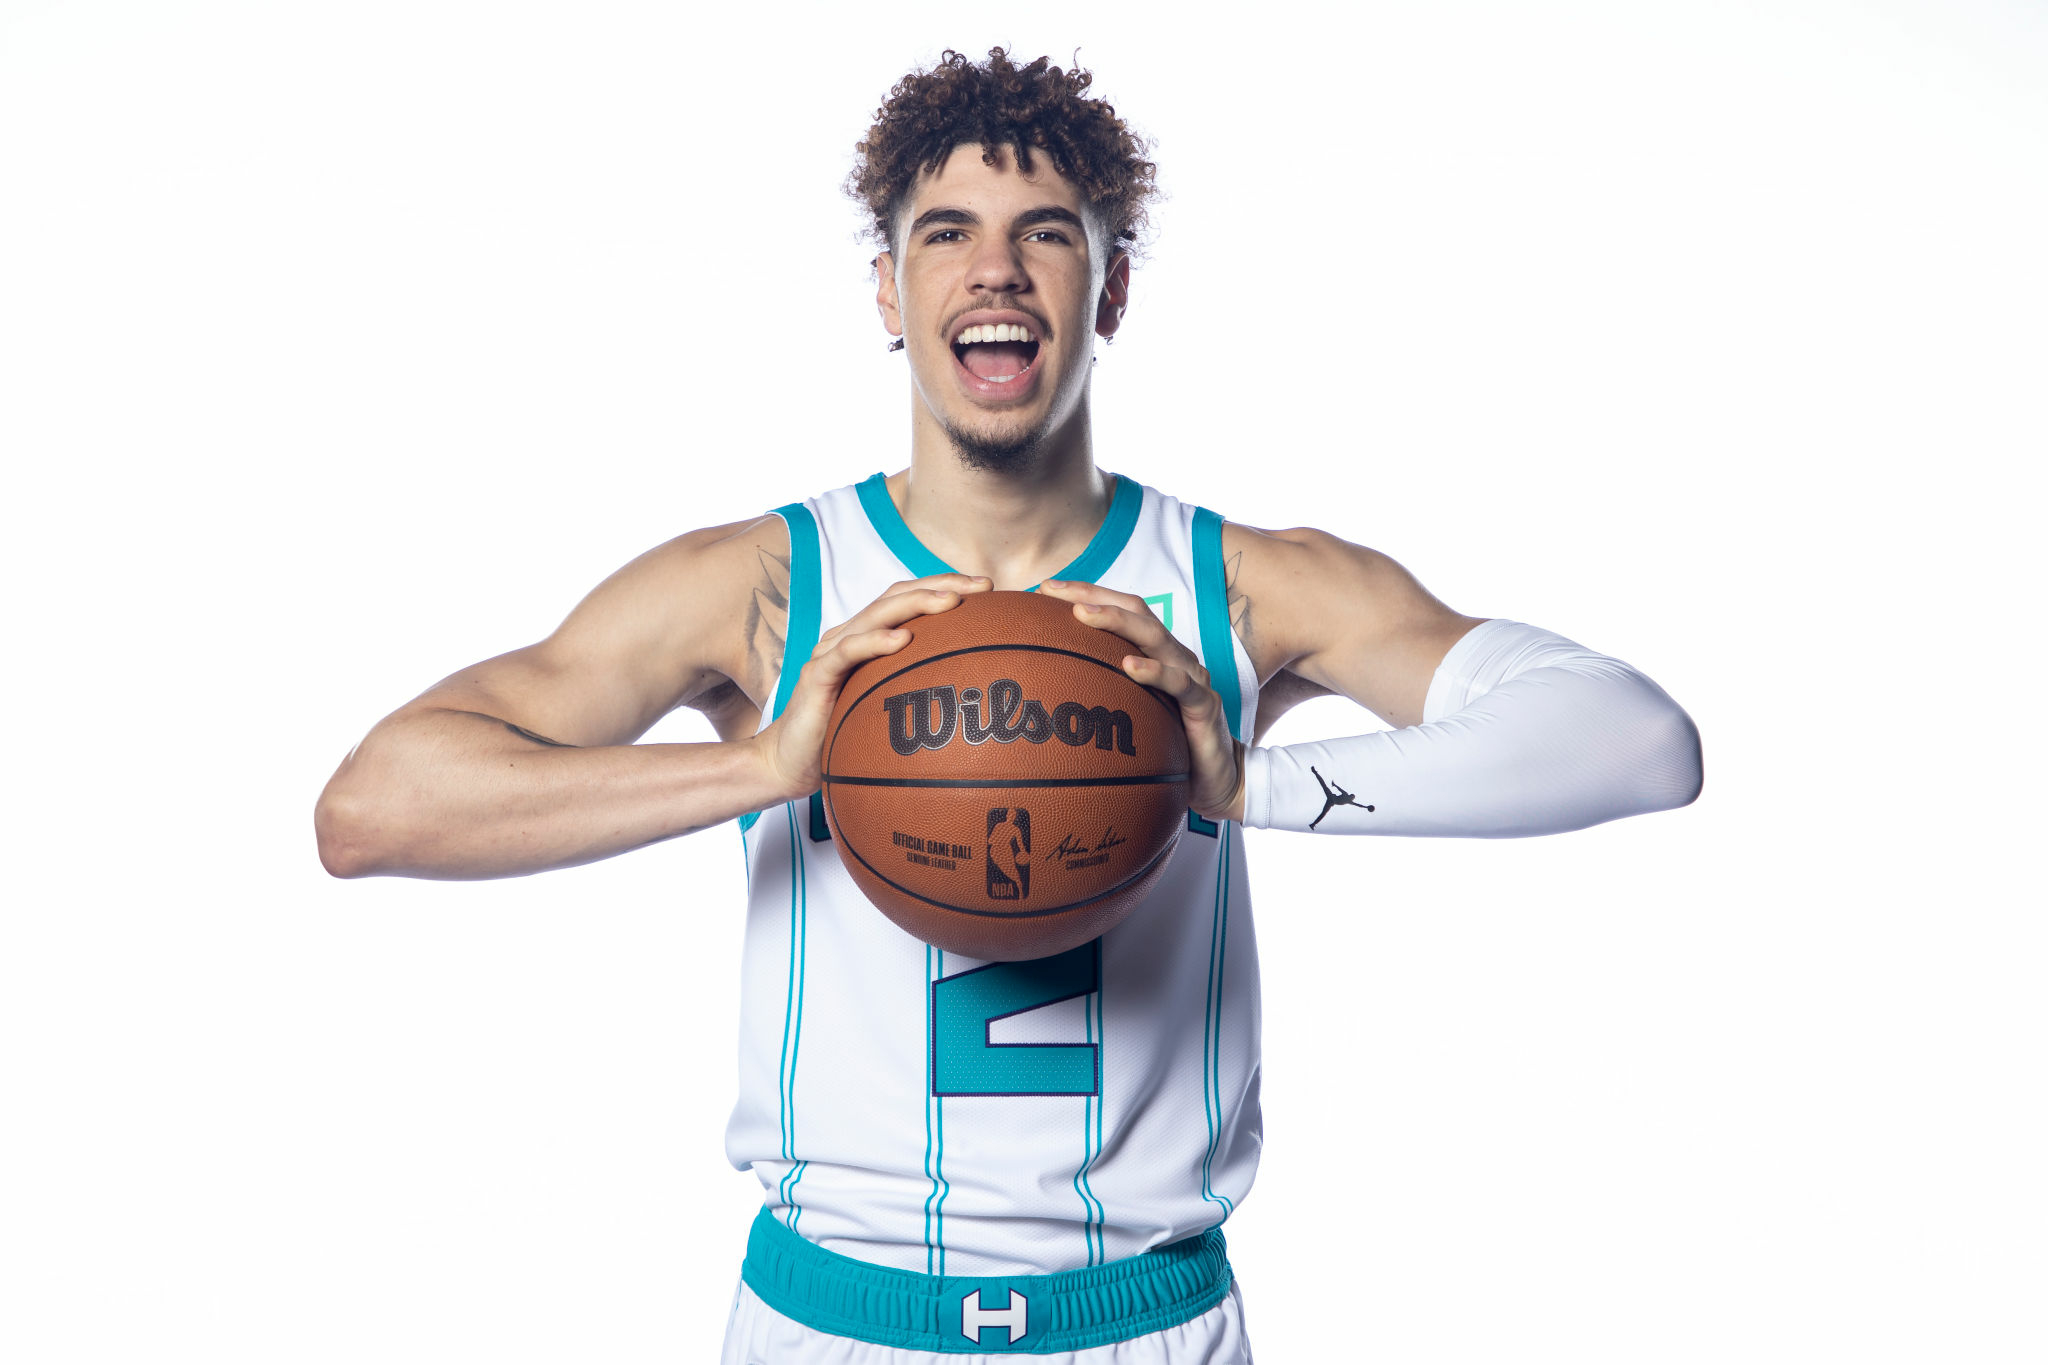 LaMelo Ball Wallpapers  Top 35 Best LaMelo Ball Backgrounds Download